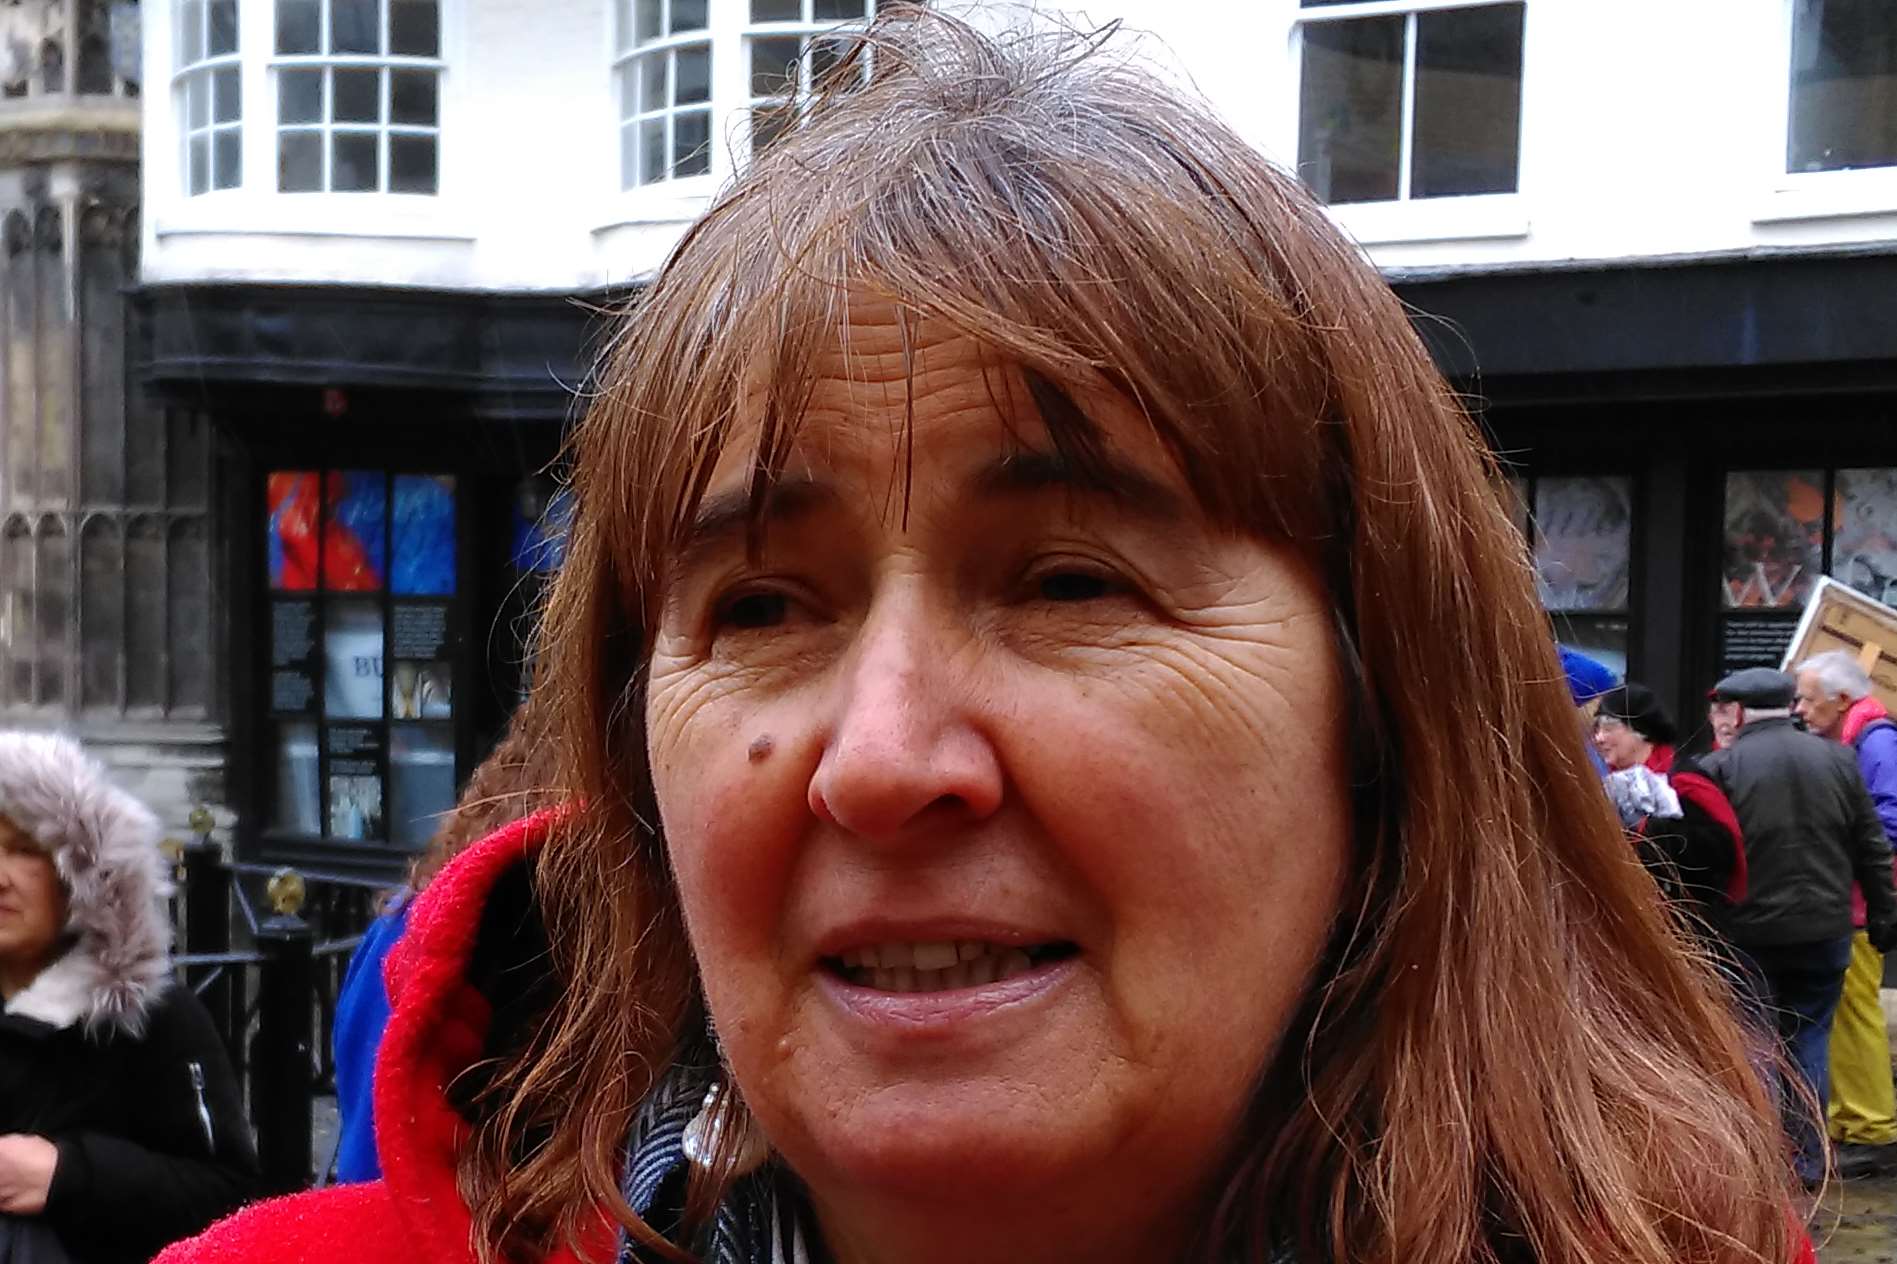 Canterbury for Europe campaigner Louise Hummerstone